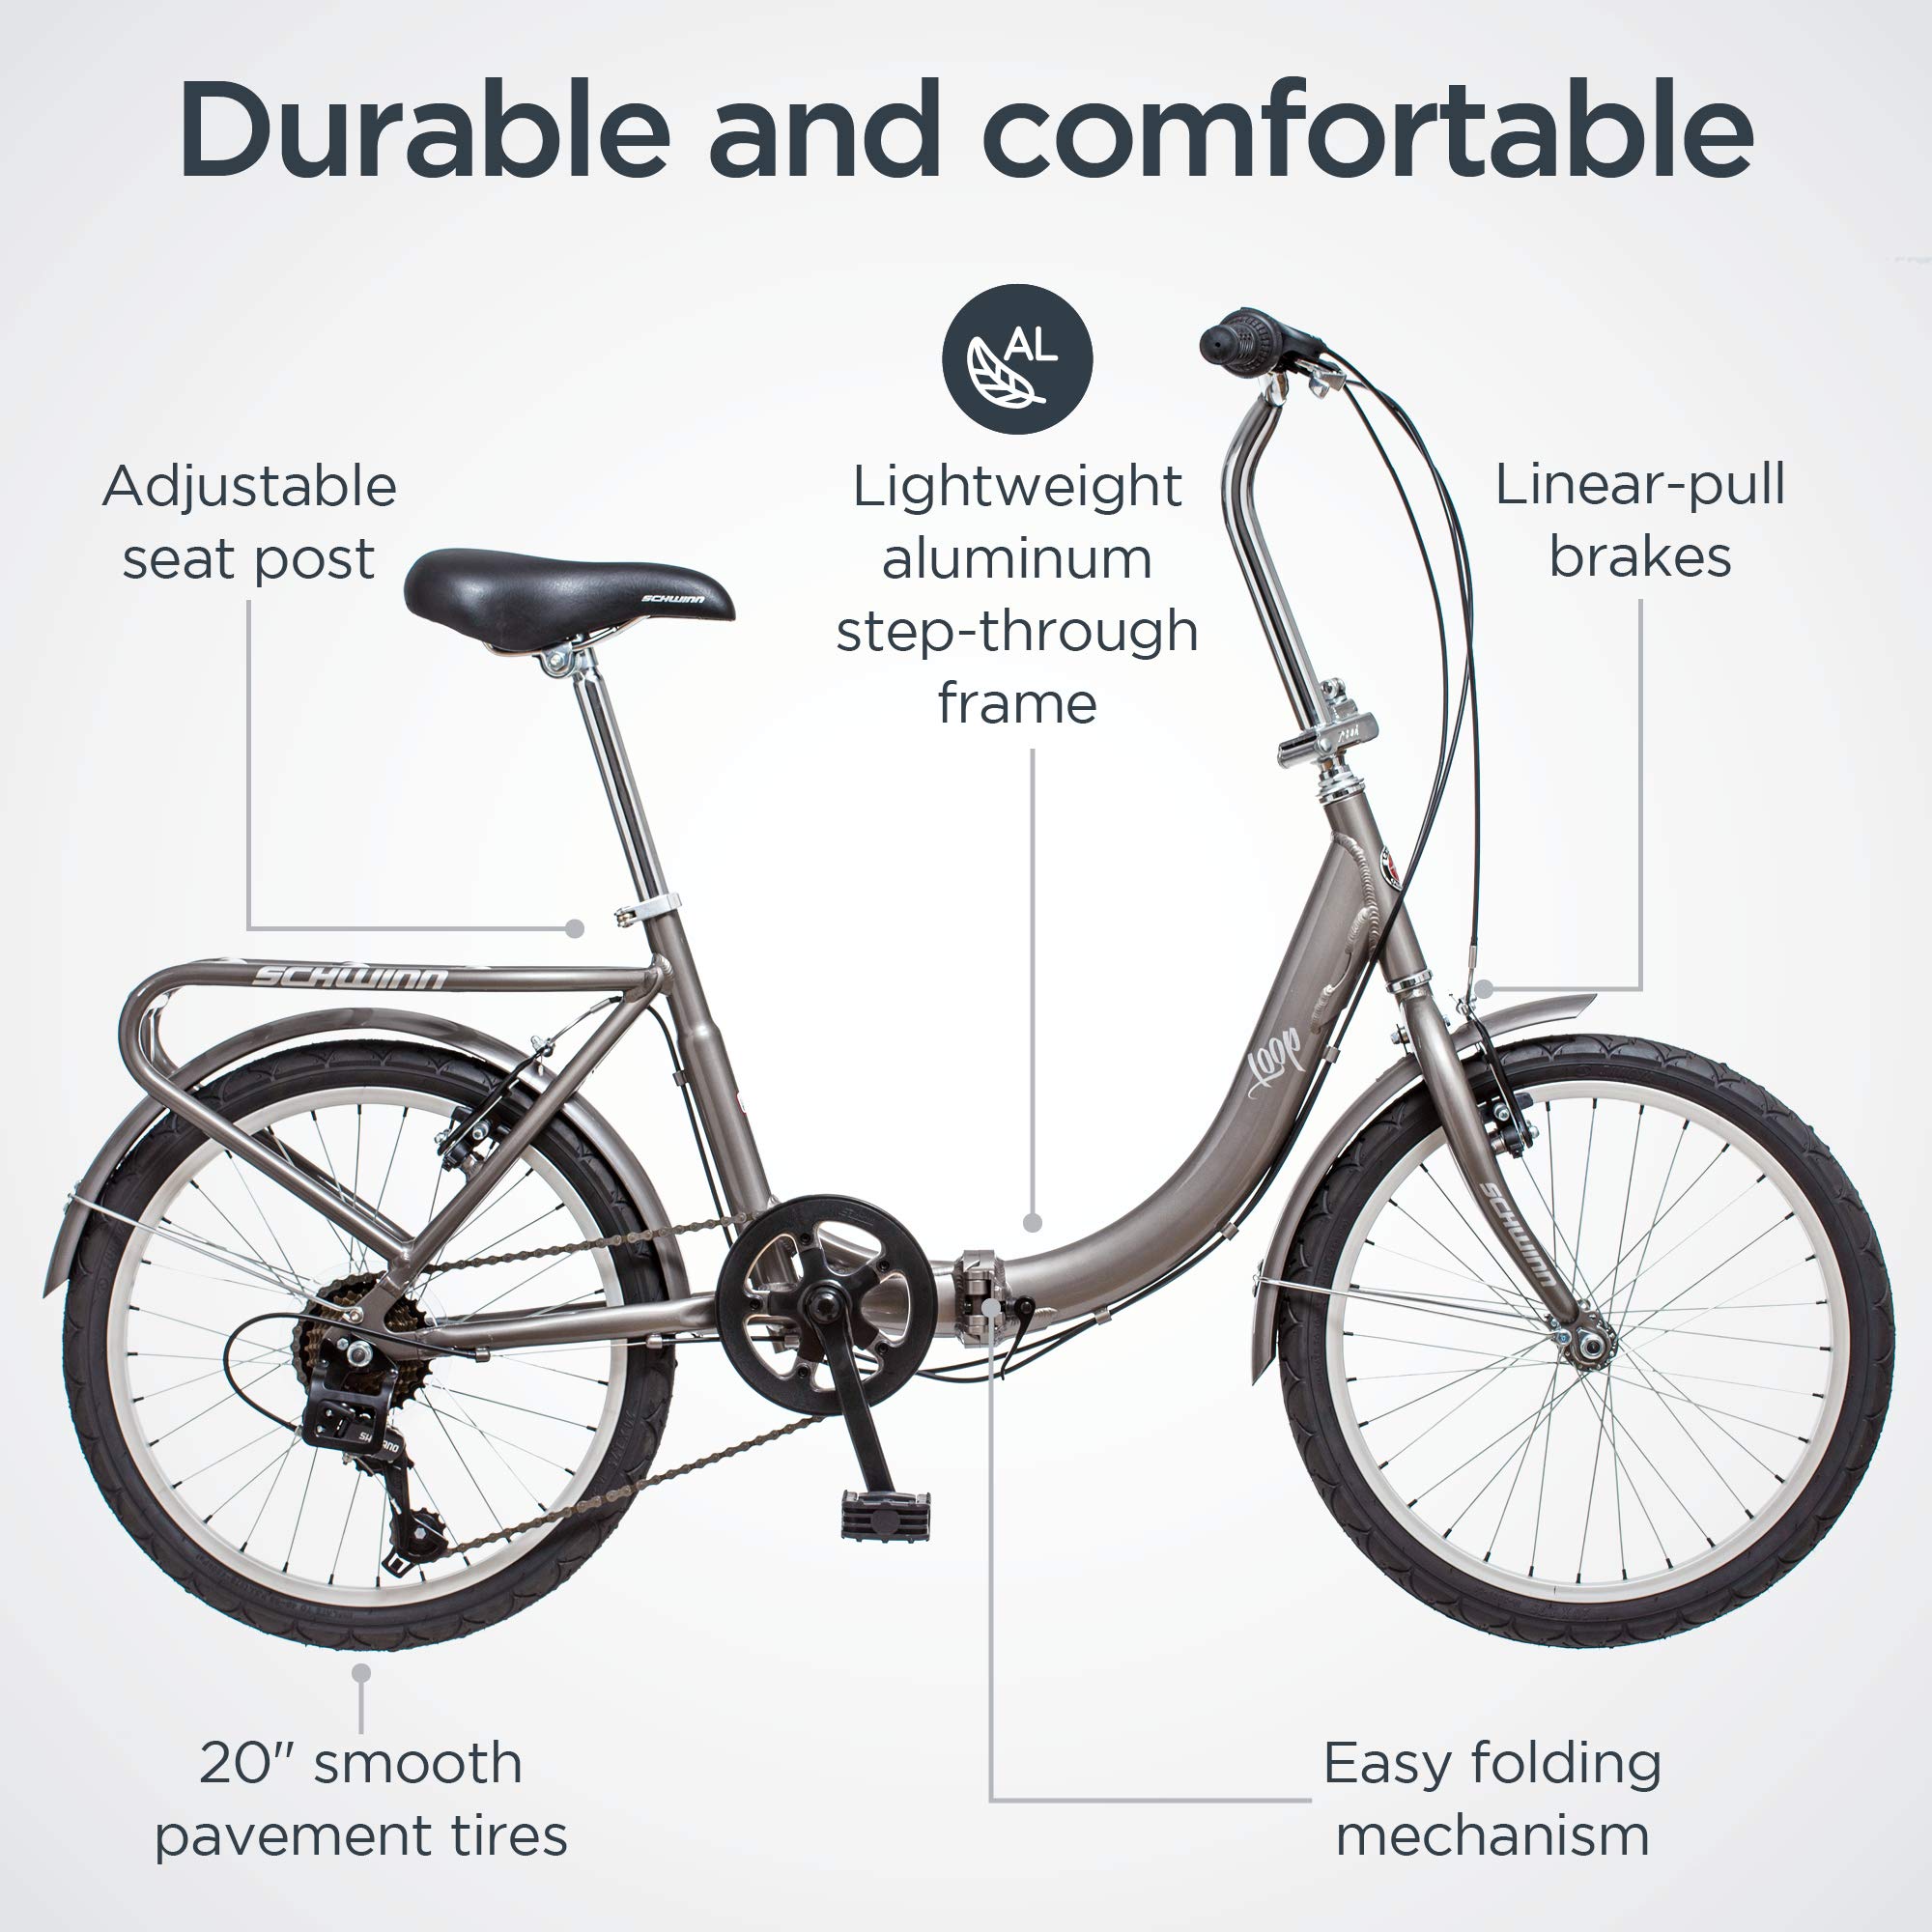 Looking to Buy Orkan Folding Bike This Year. 10 Key Details on Price, Features and More